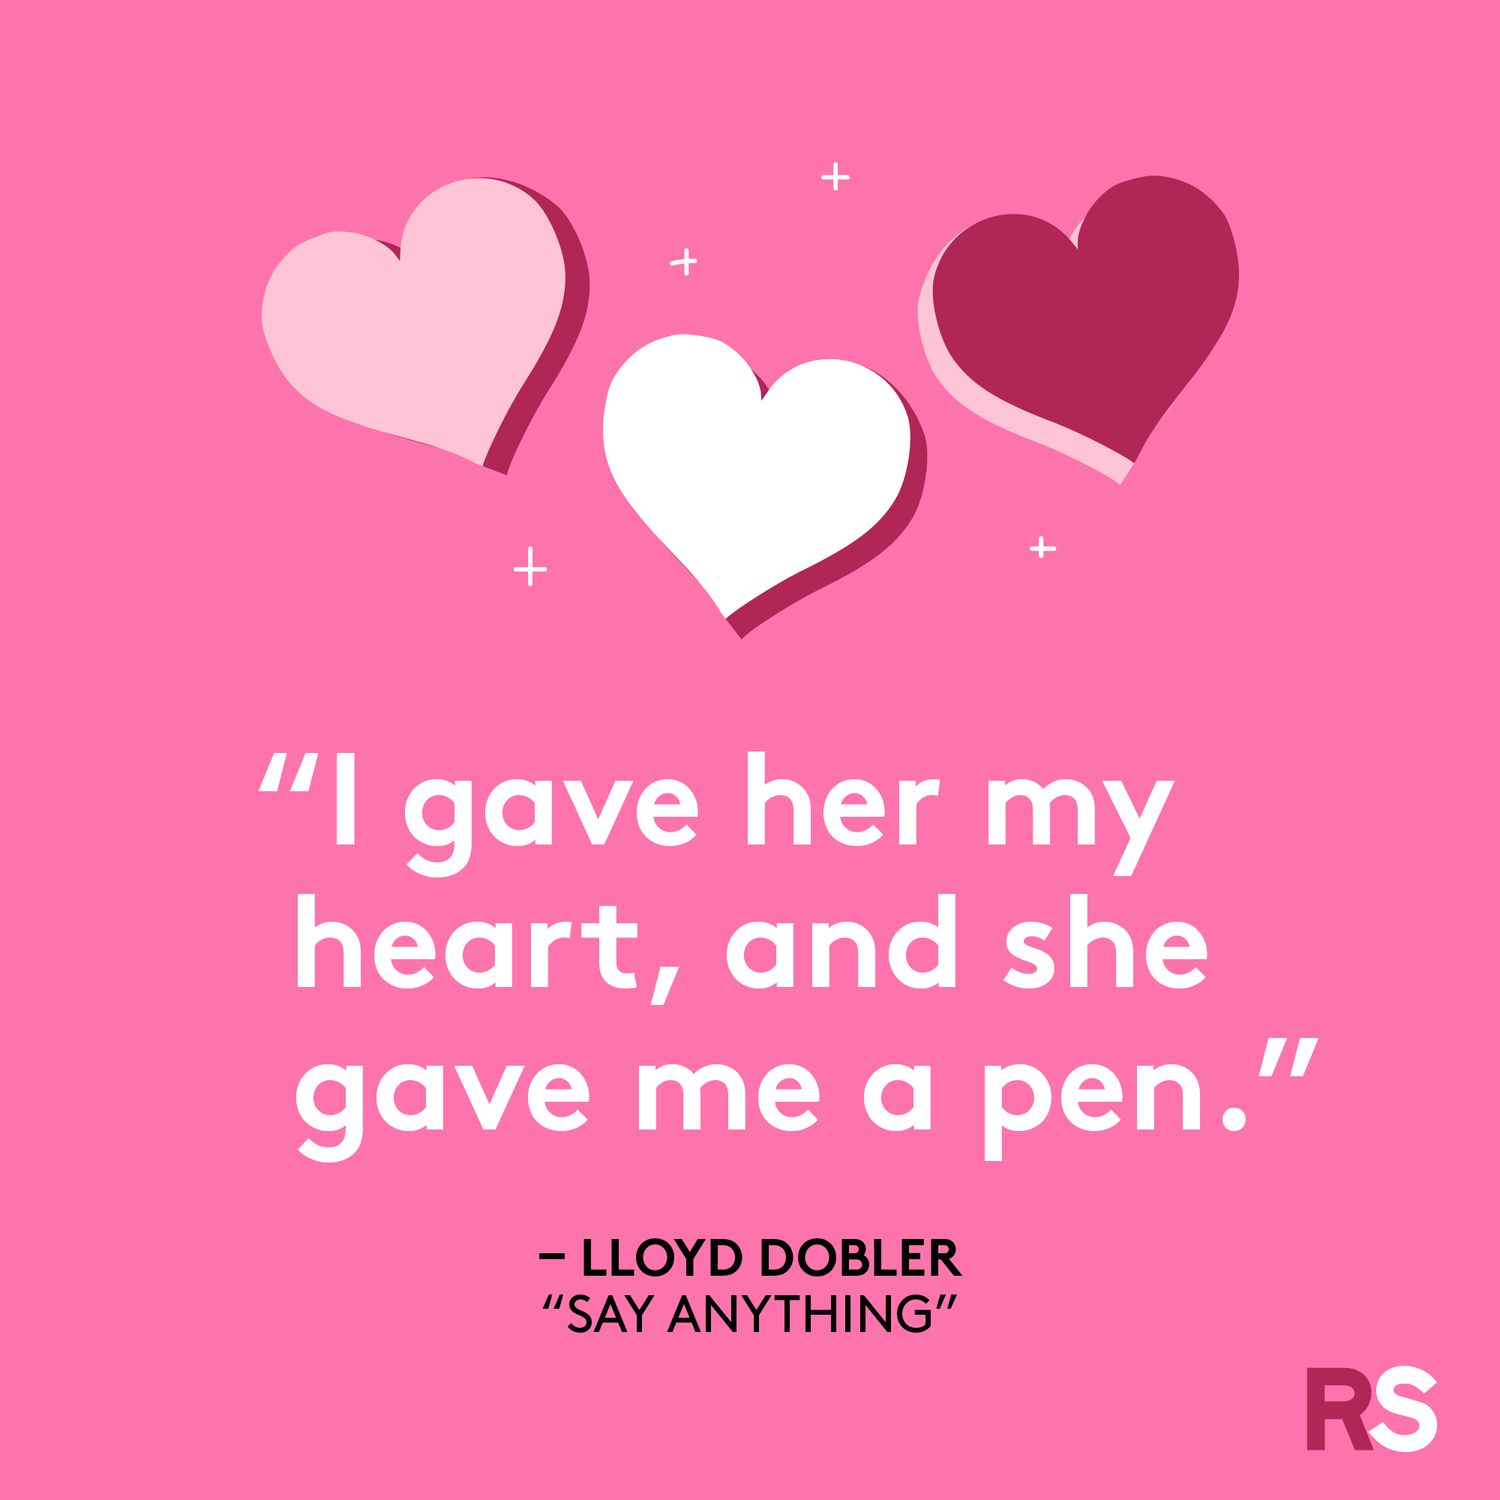 I gave her my heart, and she gave me a pen.